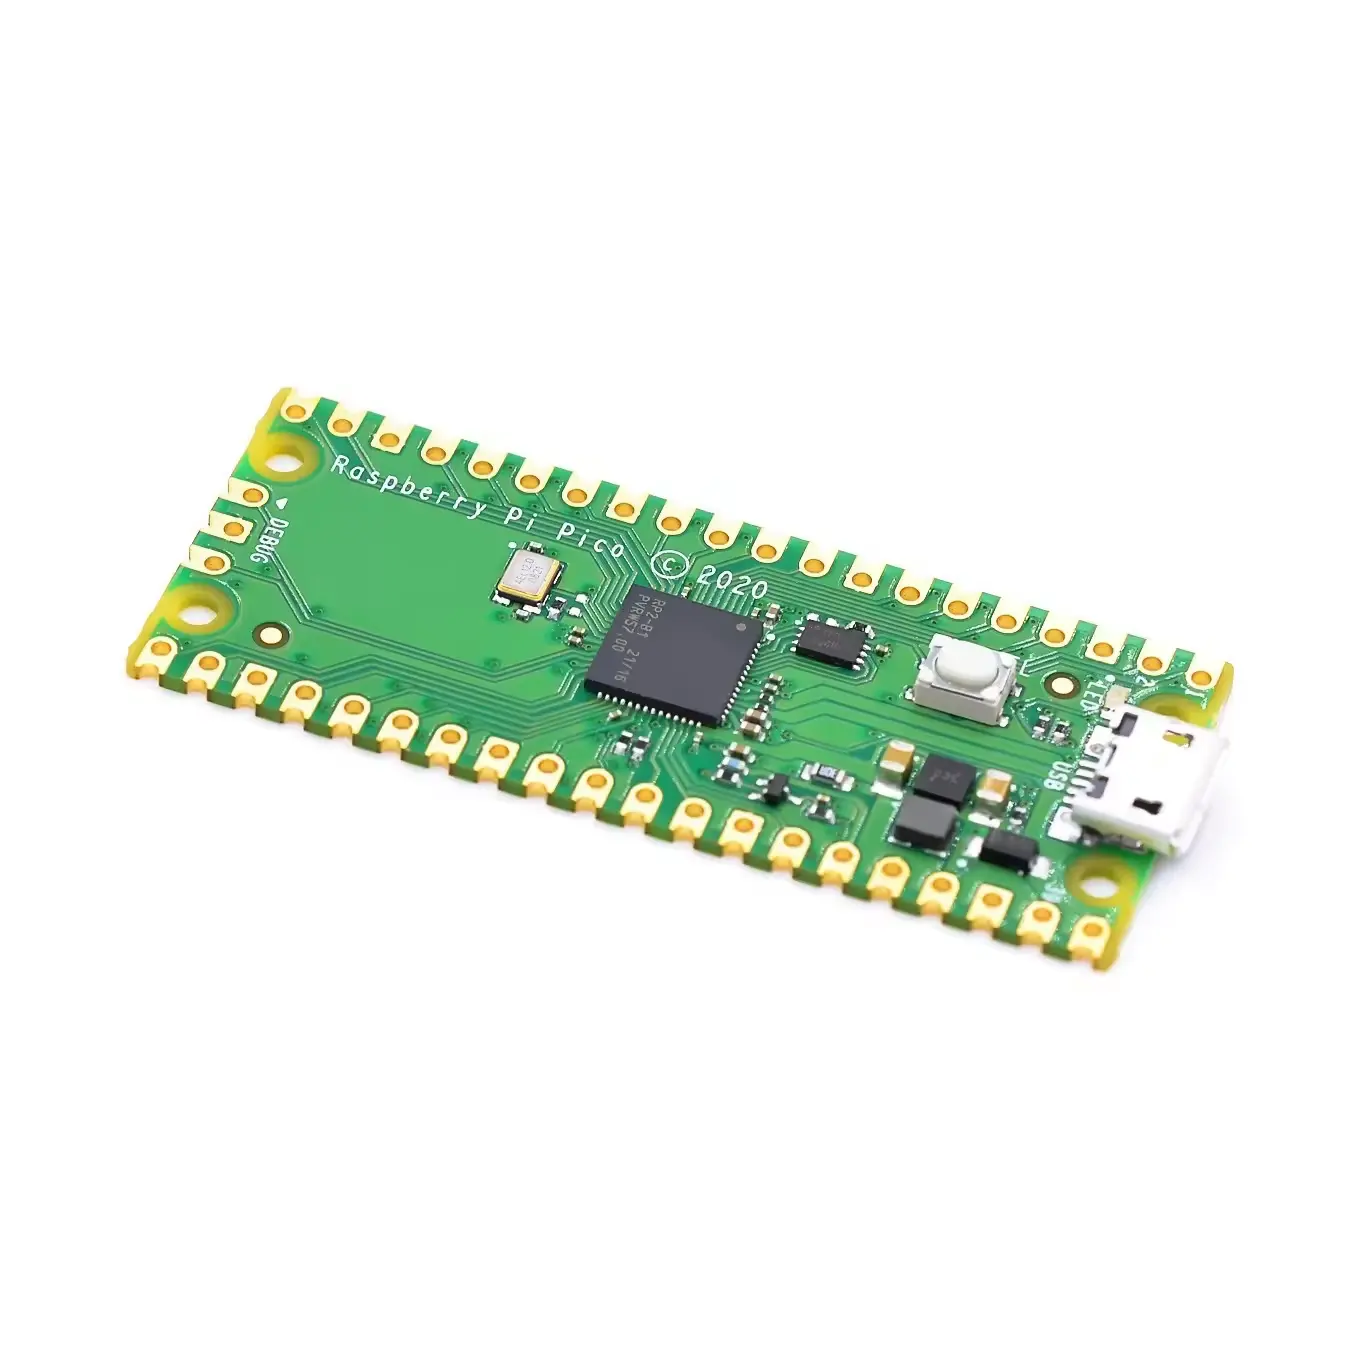 Official Raspberry leather picoboard RP2040 Dual-core 264KB ARM Low Power microcomputer High performance Cortex-M0 + processor